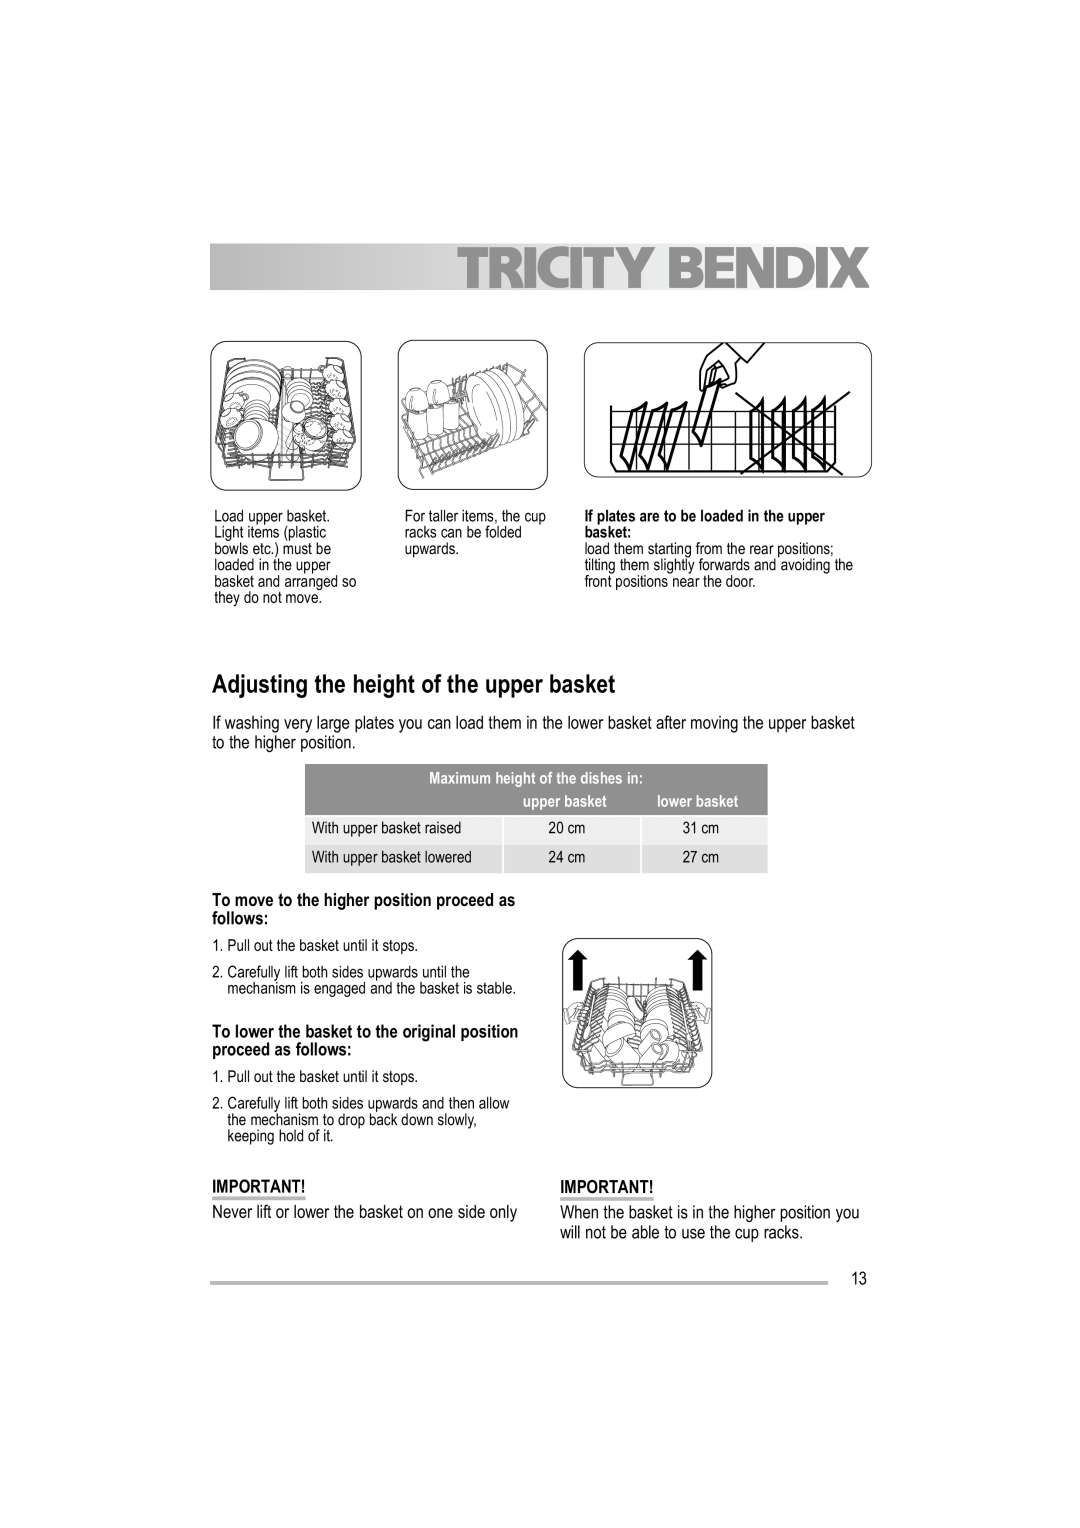 Tricity Bendix TDF 221 manual Adjusting the height of the upper basket, To move to the higher position proceed as follows 